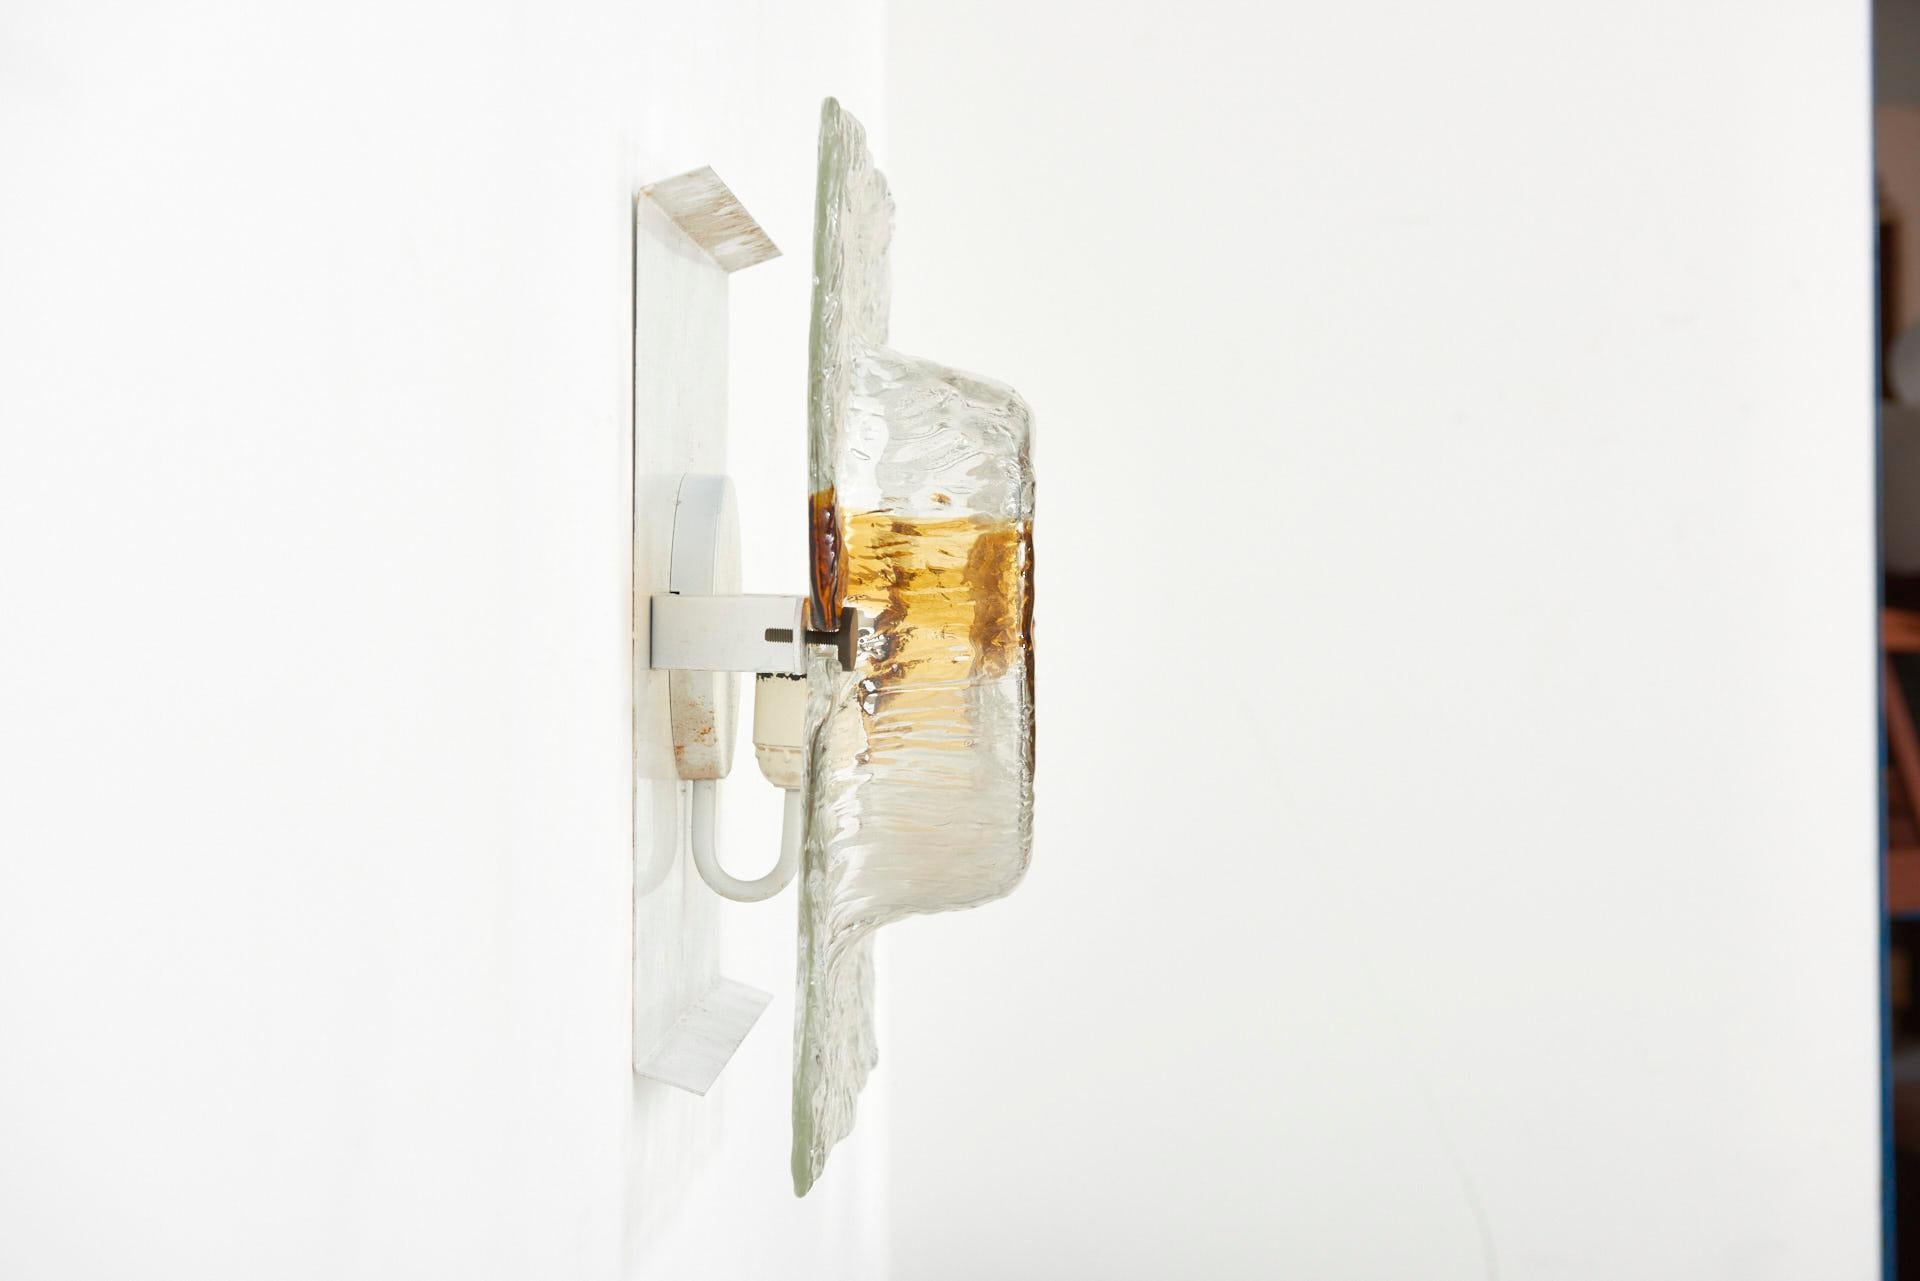 This large Italian wall lamp was designed by Toni Zuccheri for Venini in the 1960s. It features handblown Murano glass with amber tones, white lacquered frames, brass screws, and a Bakelite socket.